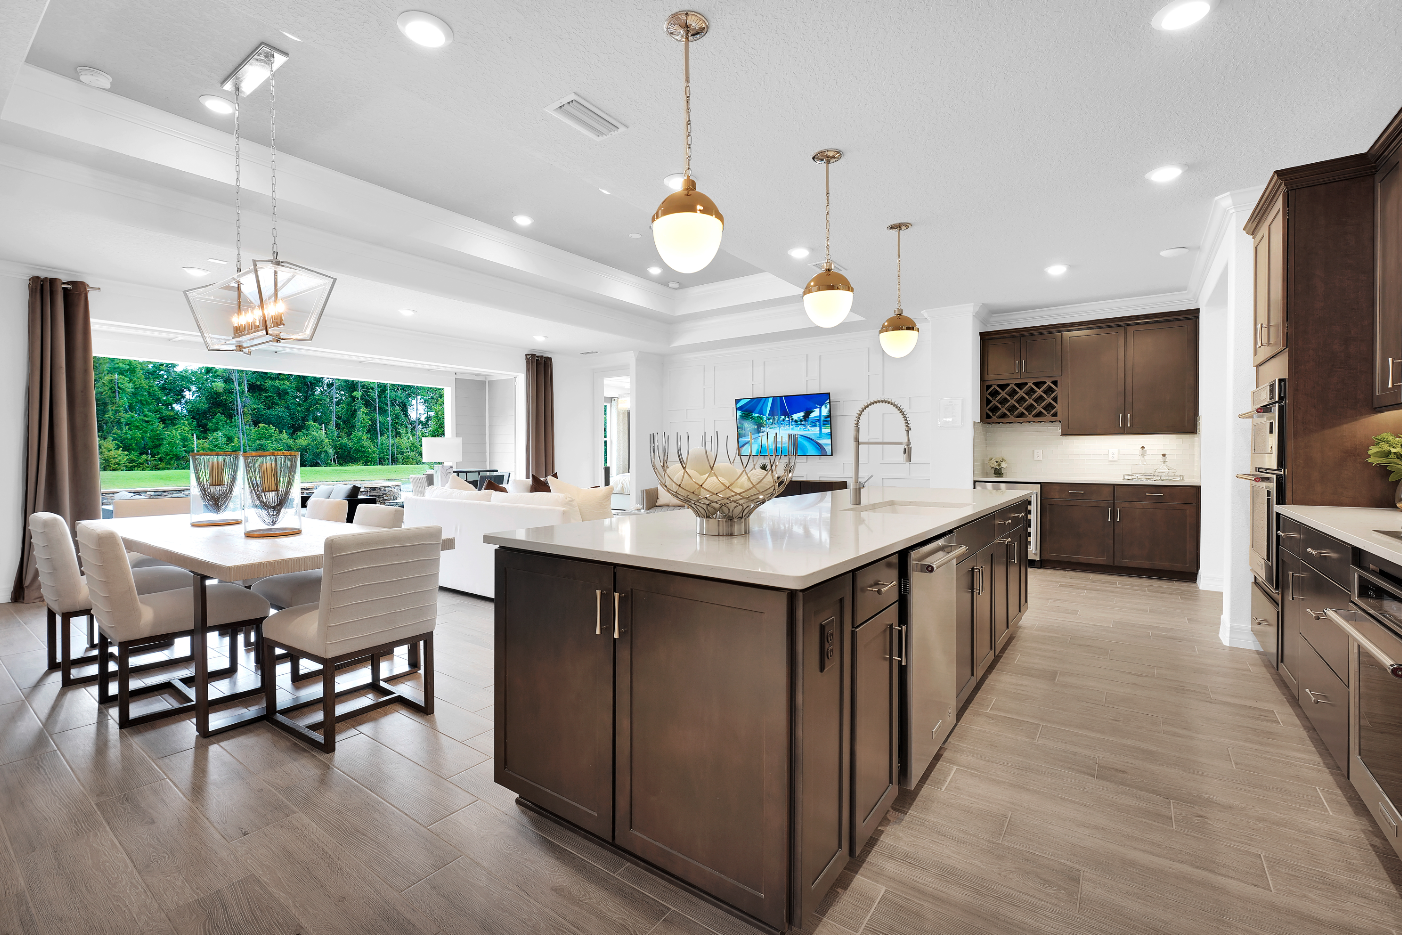 Del Webb Wildlight open concept kitchen, dining and living rooms with large island and big windows.